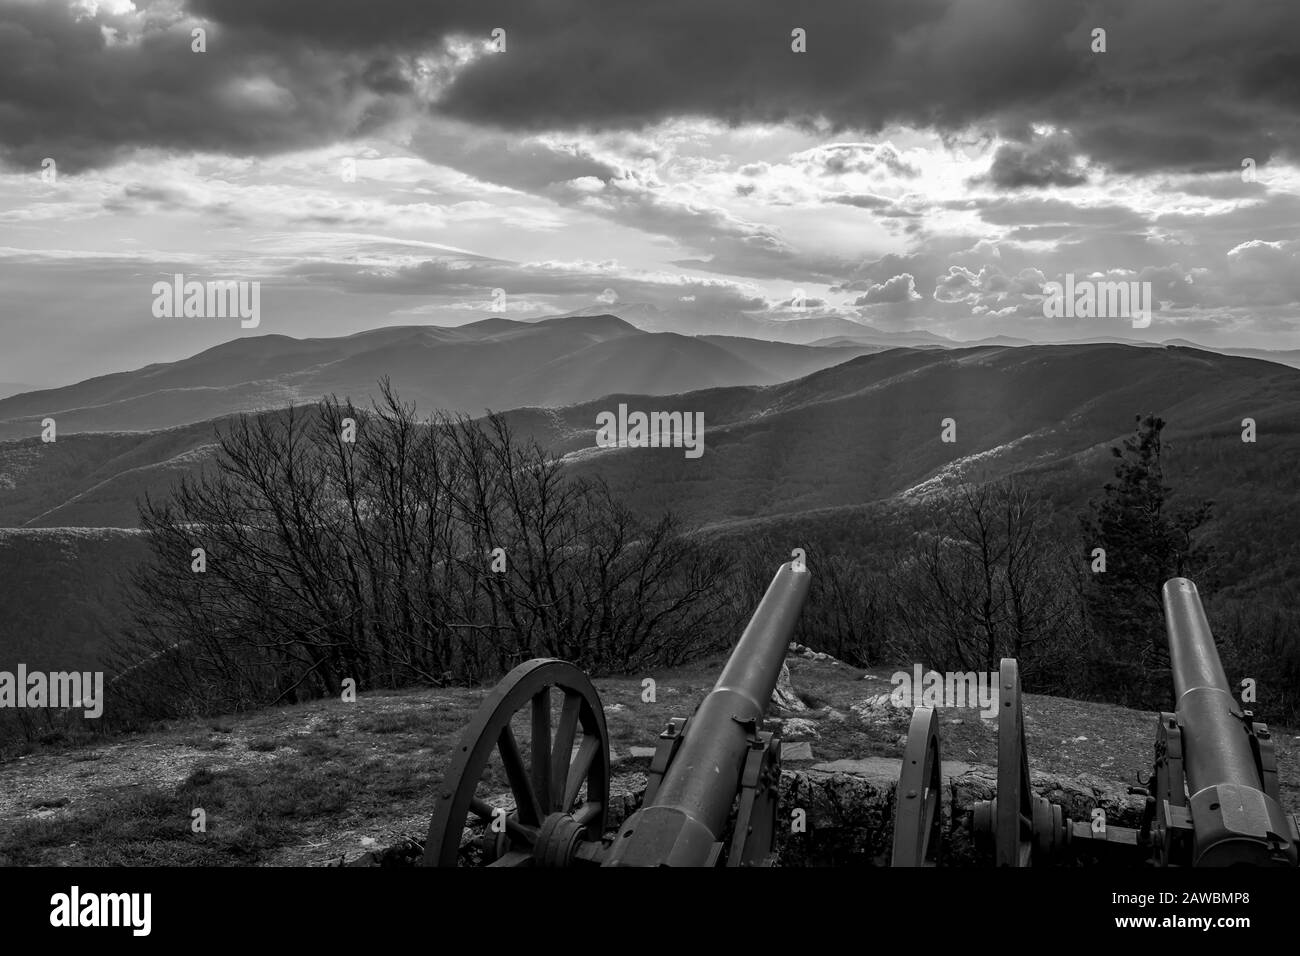 Dramatic autumn black and white view over the mountain range from near Shipka peak, Stara Planina mountain in Central Bulgaria as seen from Shipka Memorial. Moody feeling. Old Russian cannon Stock Photo